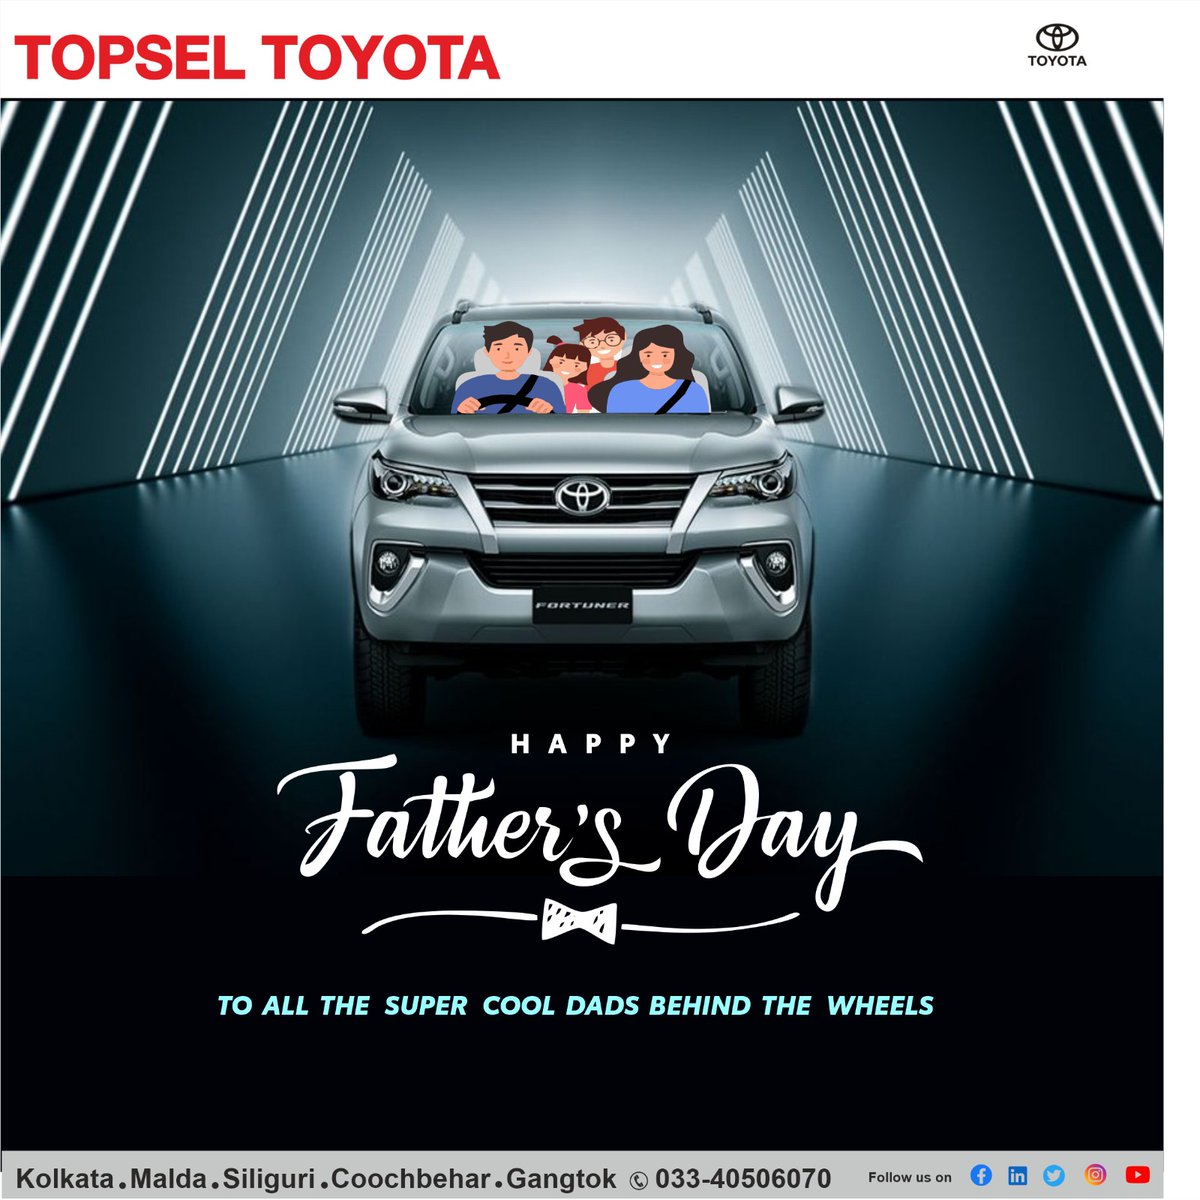 Happy Fathers Day to ALL the super cool dads.

#HappyFathersDay #FathersDay #Fathersday2023 #TOYOTA #ToyotaIndia #TopselToyota